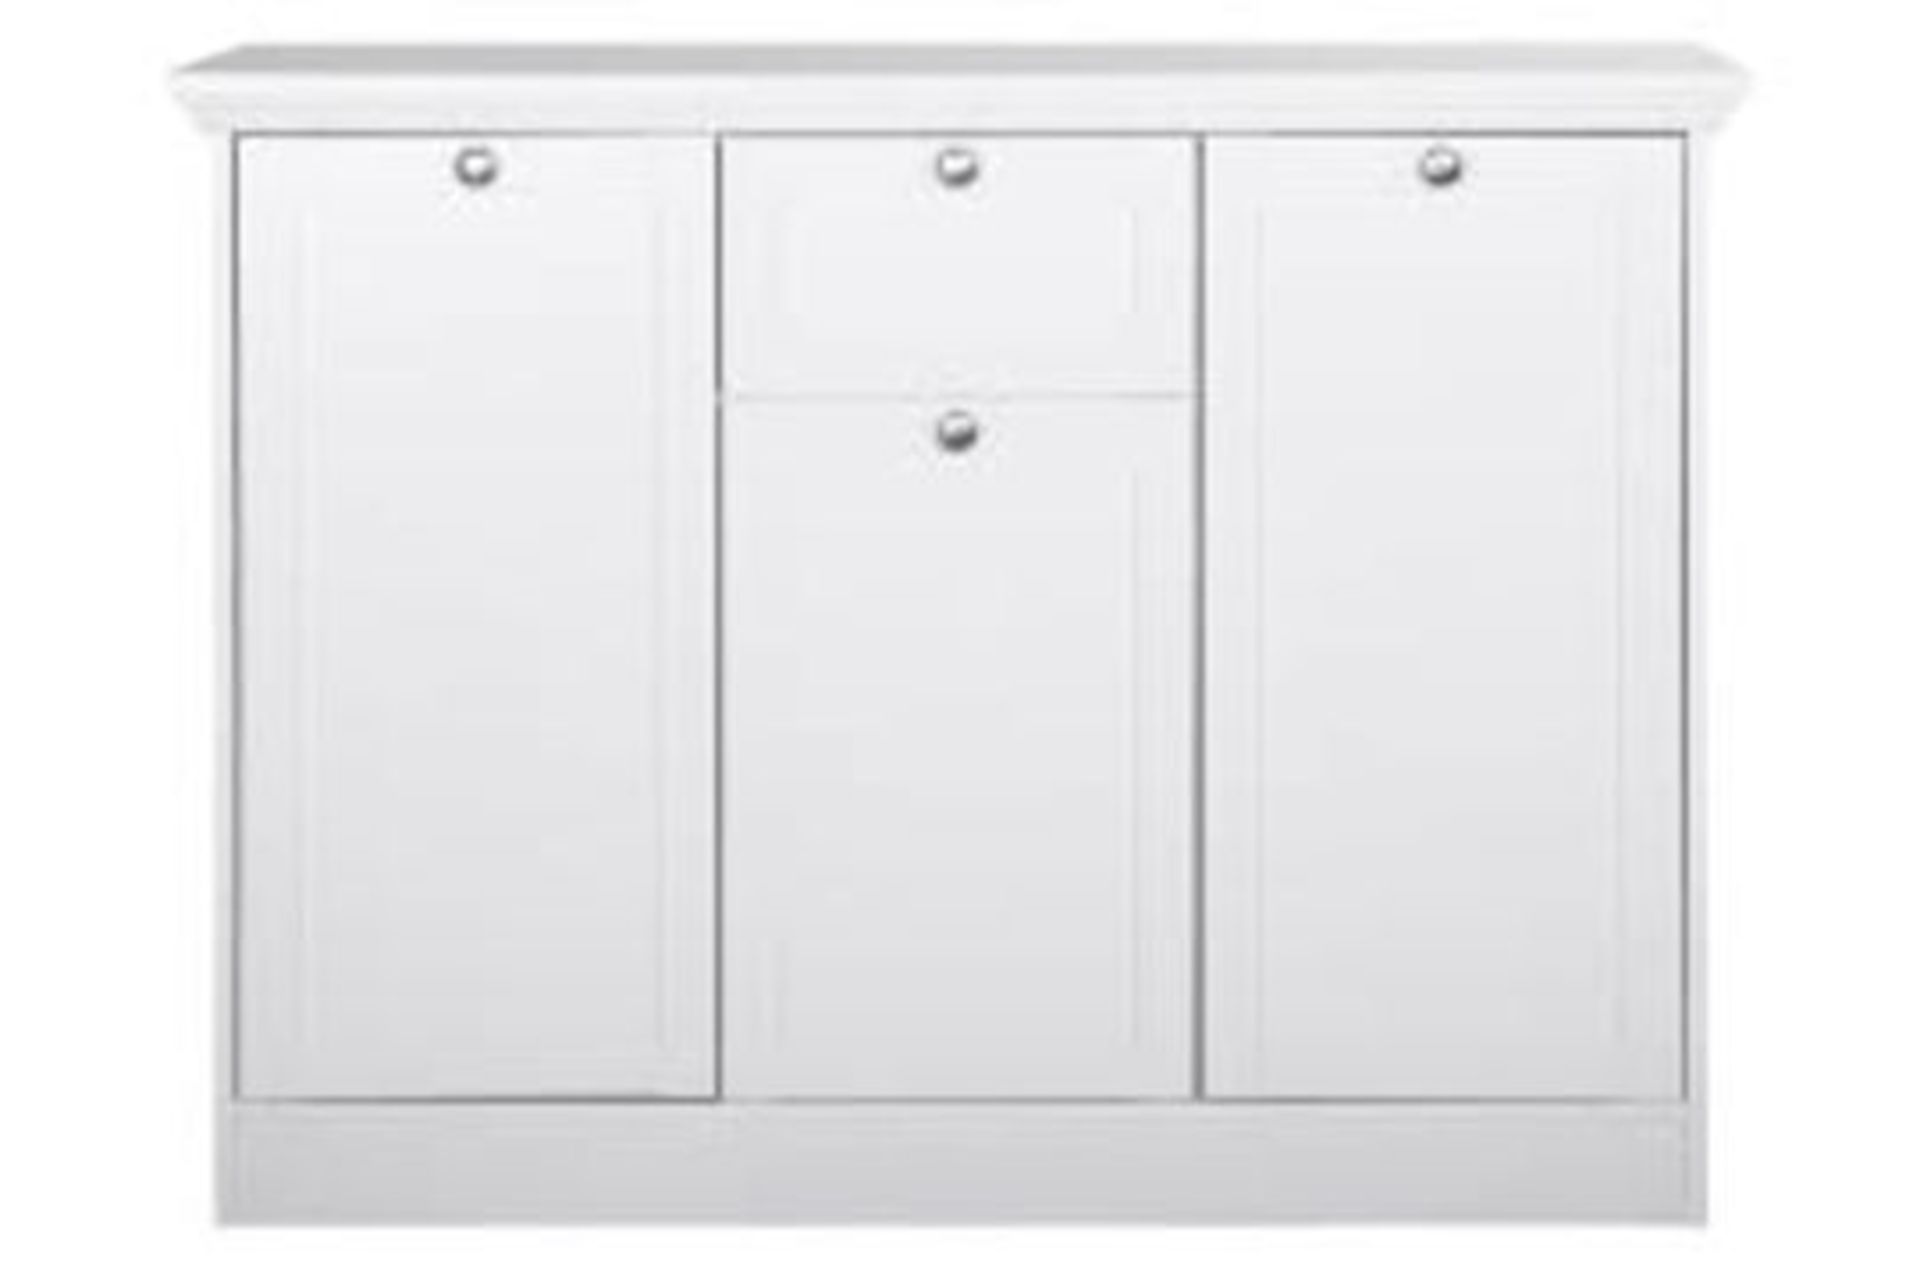 Boxed Kommode Landwood 15 Designer Cabinet RRP £200 (Pictures Are For Illustration Purposes Only) (